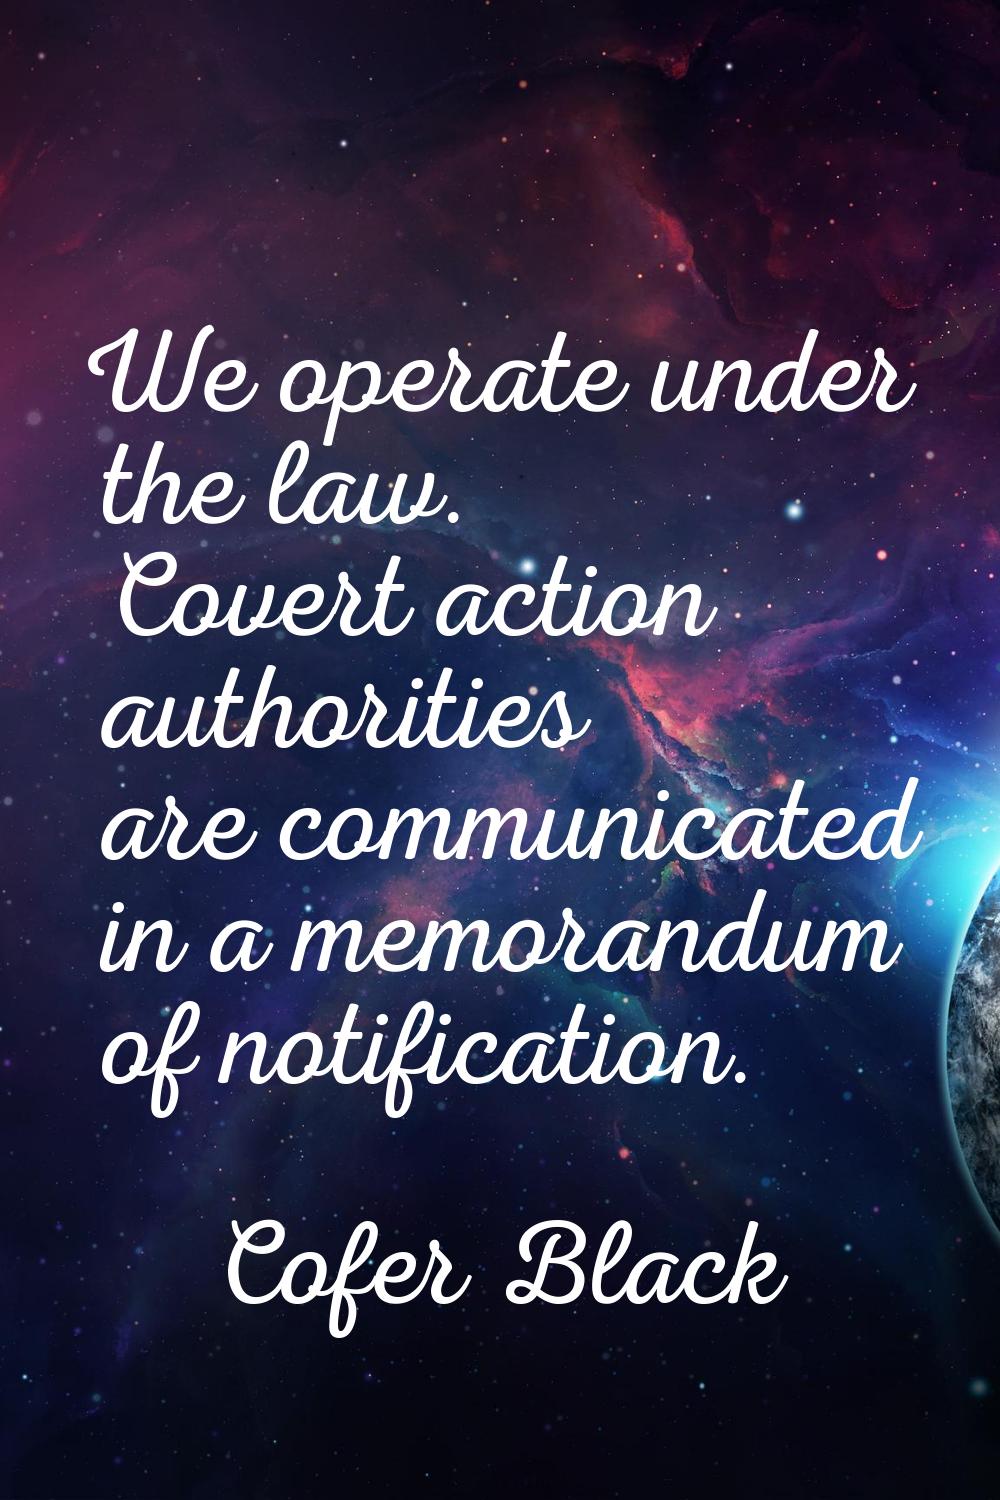 We operate under the law. Covert action authorities are communicated in a memorandum of notificatio